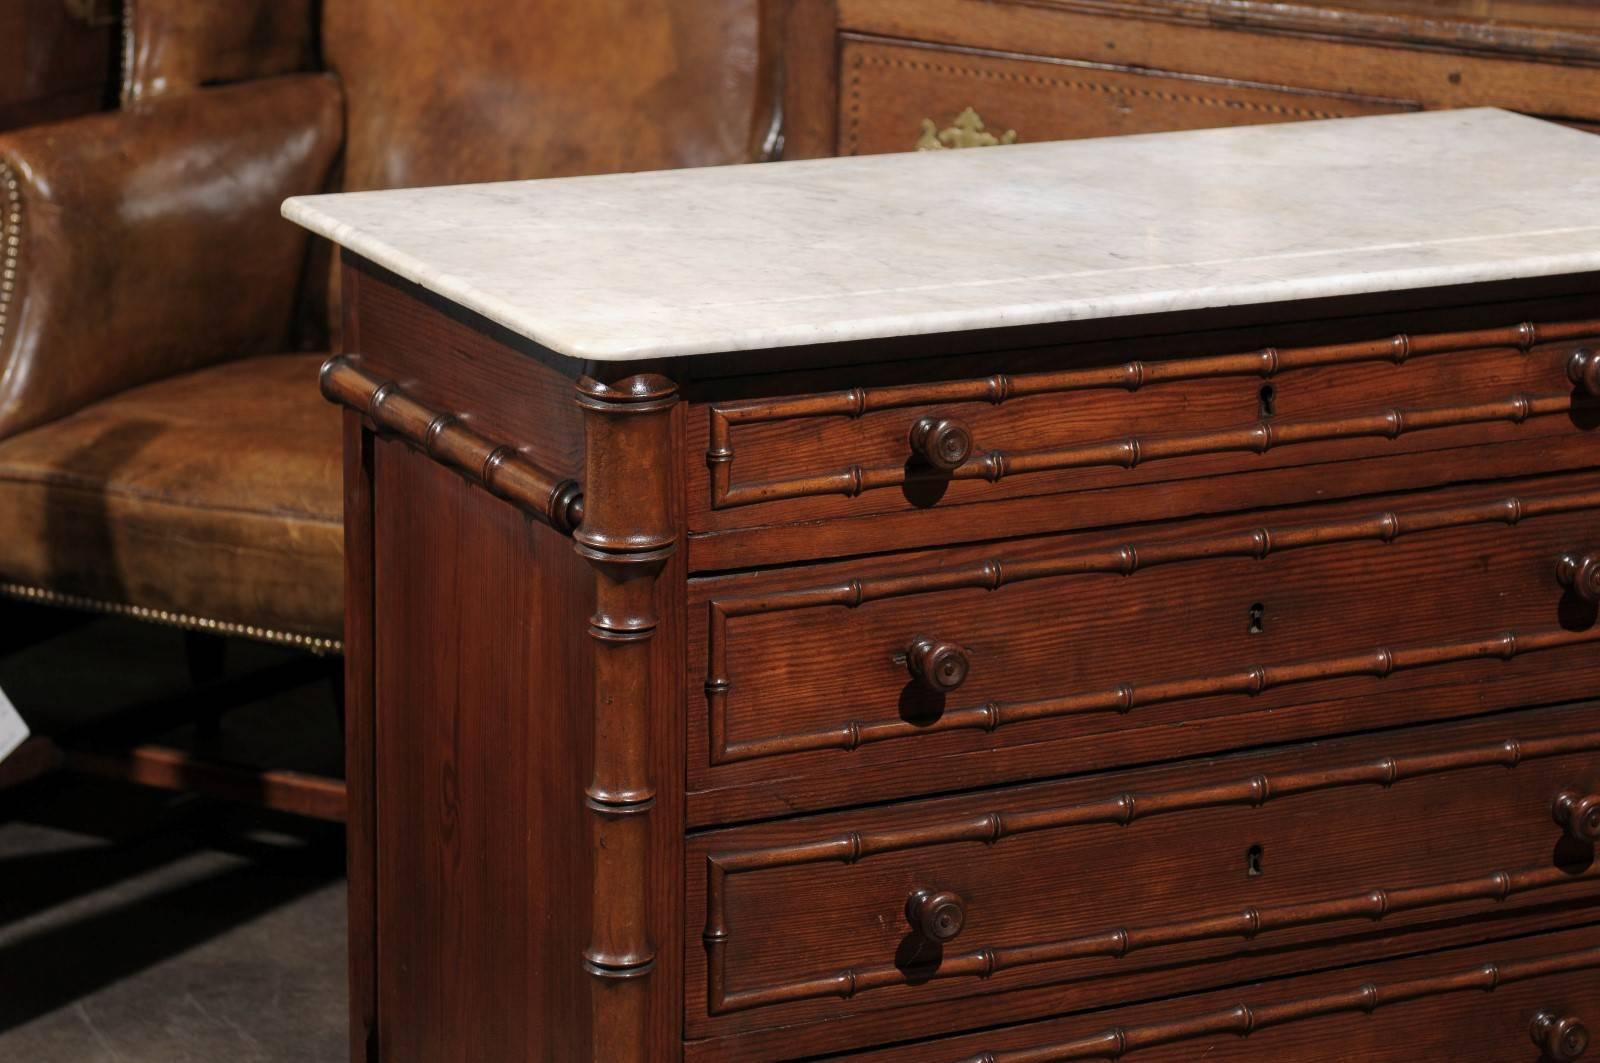 19th century English incised Marble Top Chest of Drawers with Faux Bamboo Trim 1